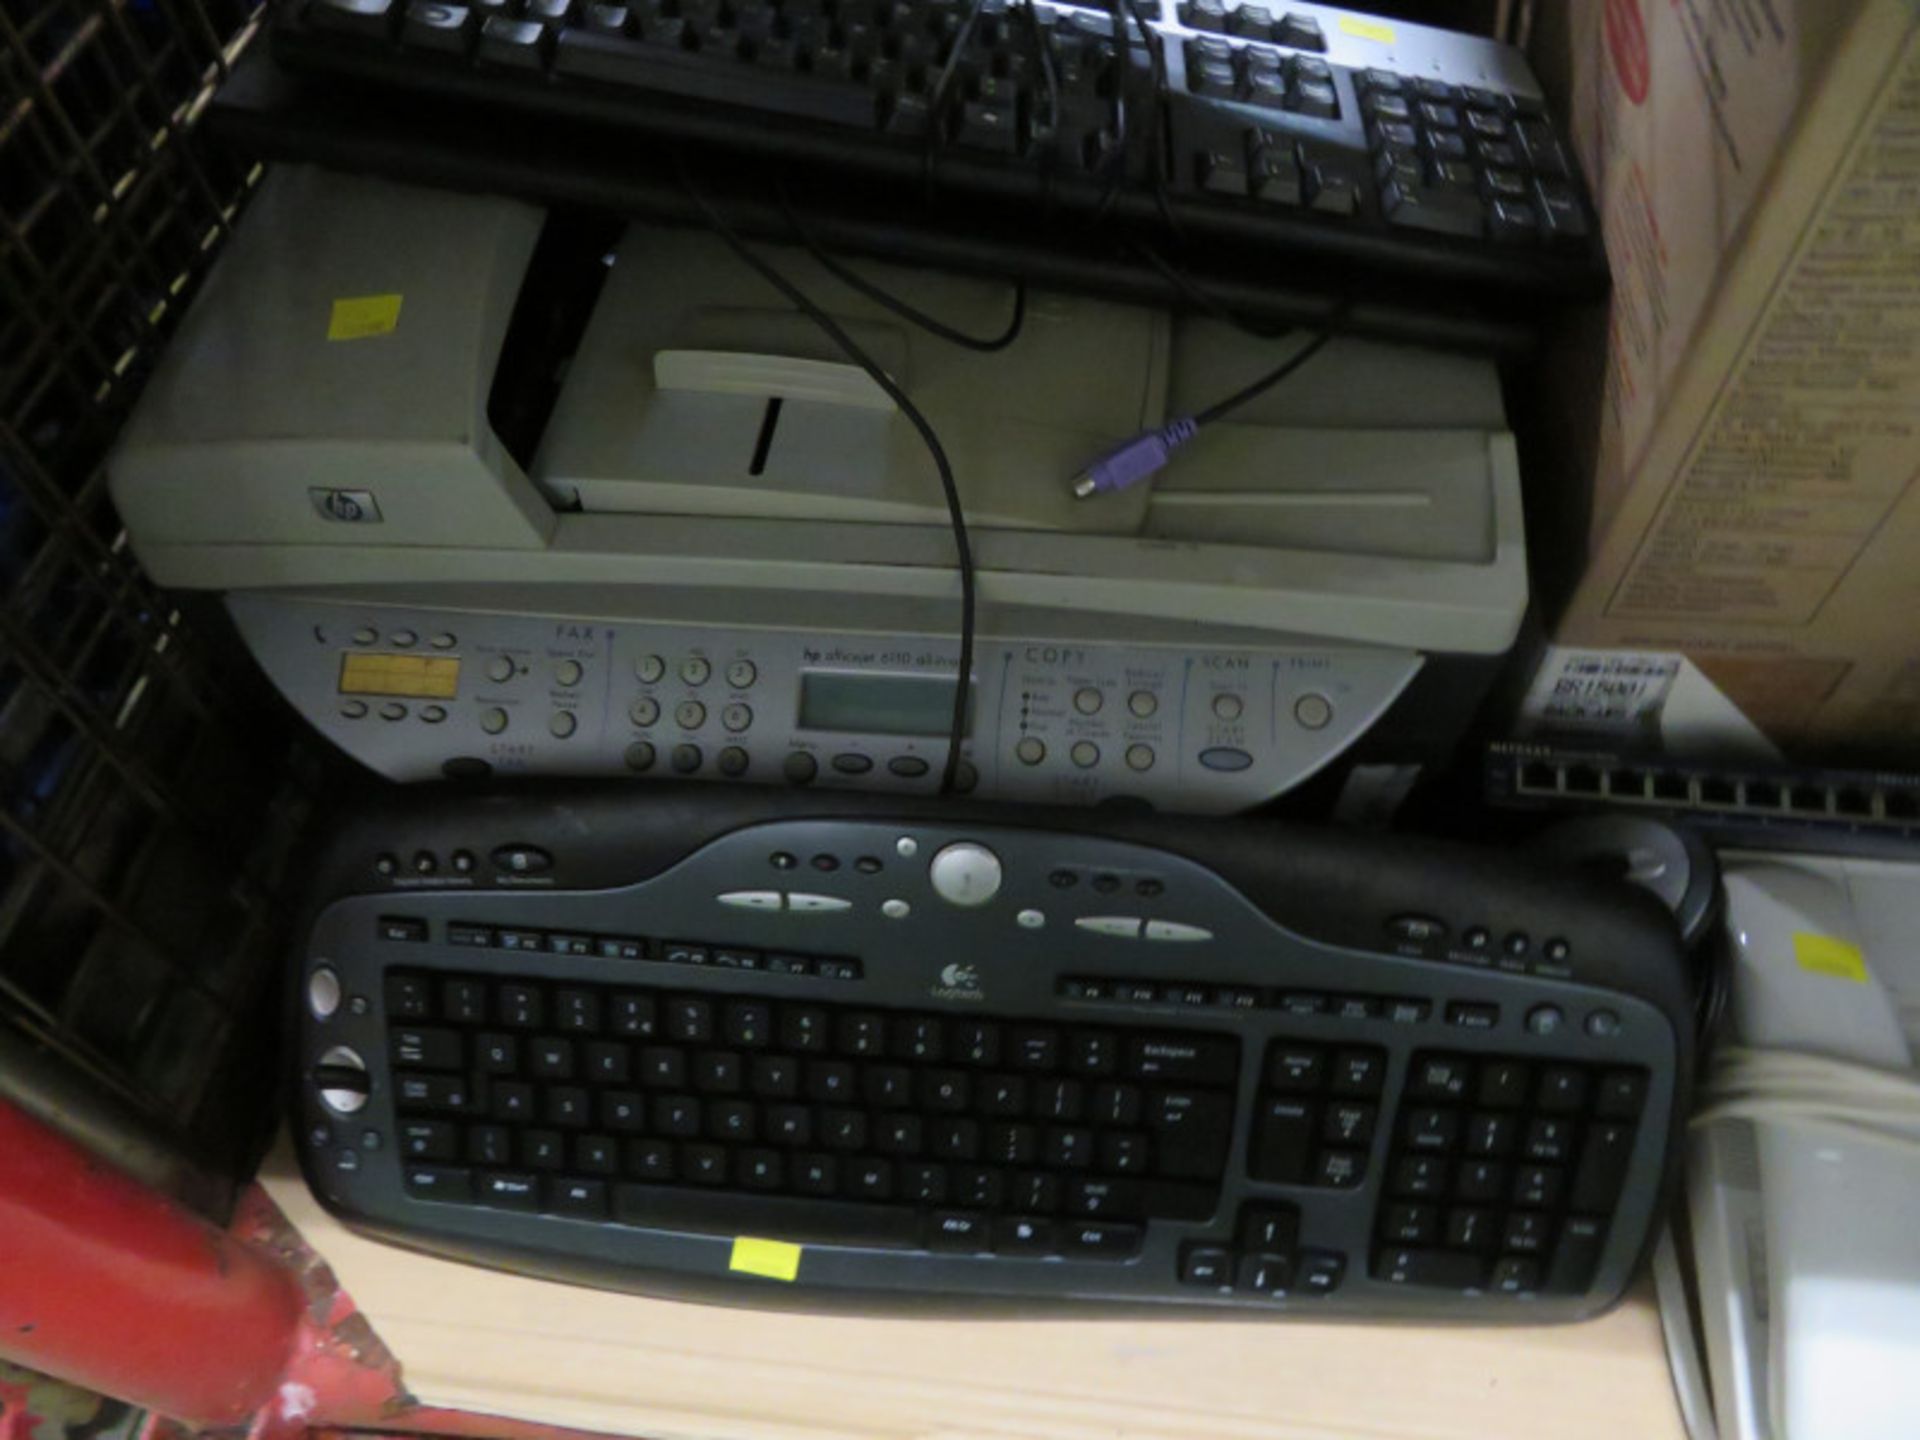 Office equipment - Monitors, keyboards, office drawers - Image 3 of 6